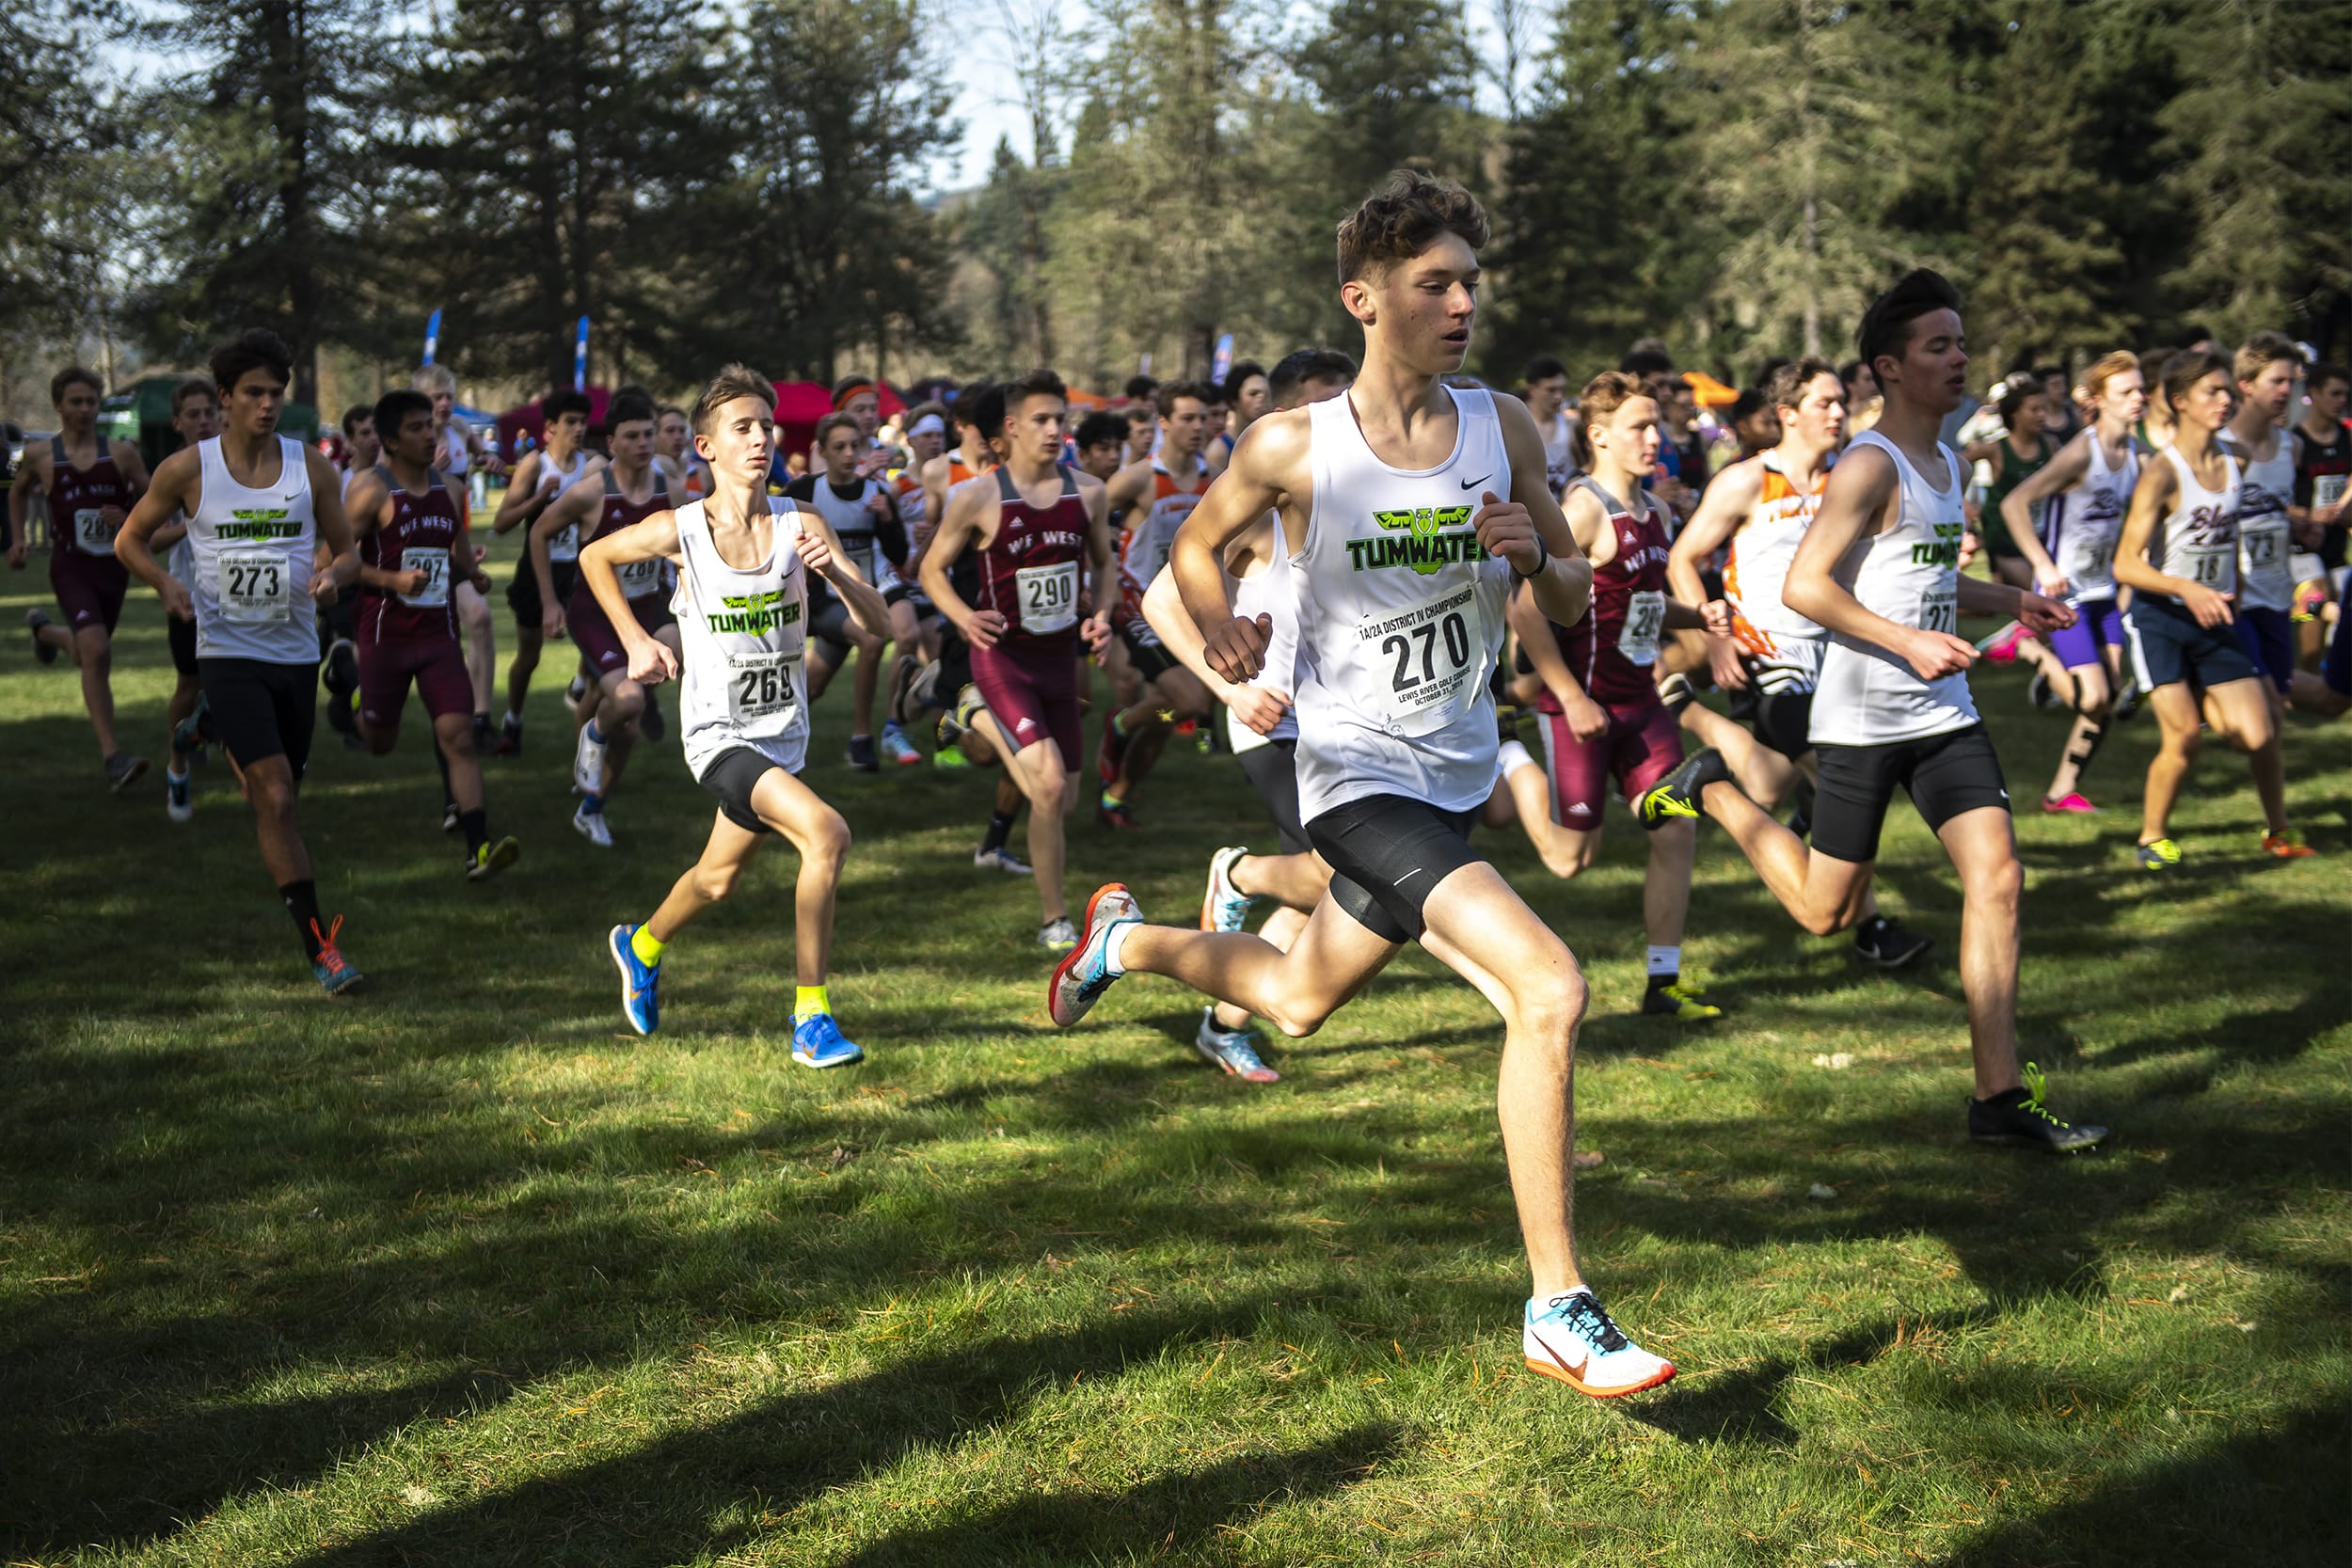 Runners take off from the starting line during the 2A Boys District Cross Country meet at Lewis River Golf Course on Thursday afternoon, Oct. 31, 2019.